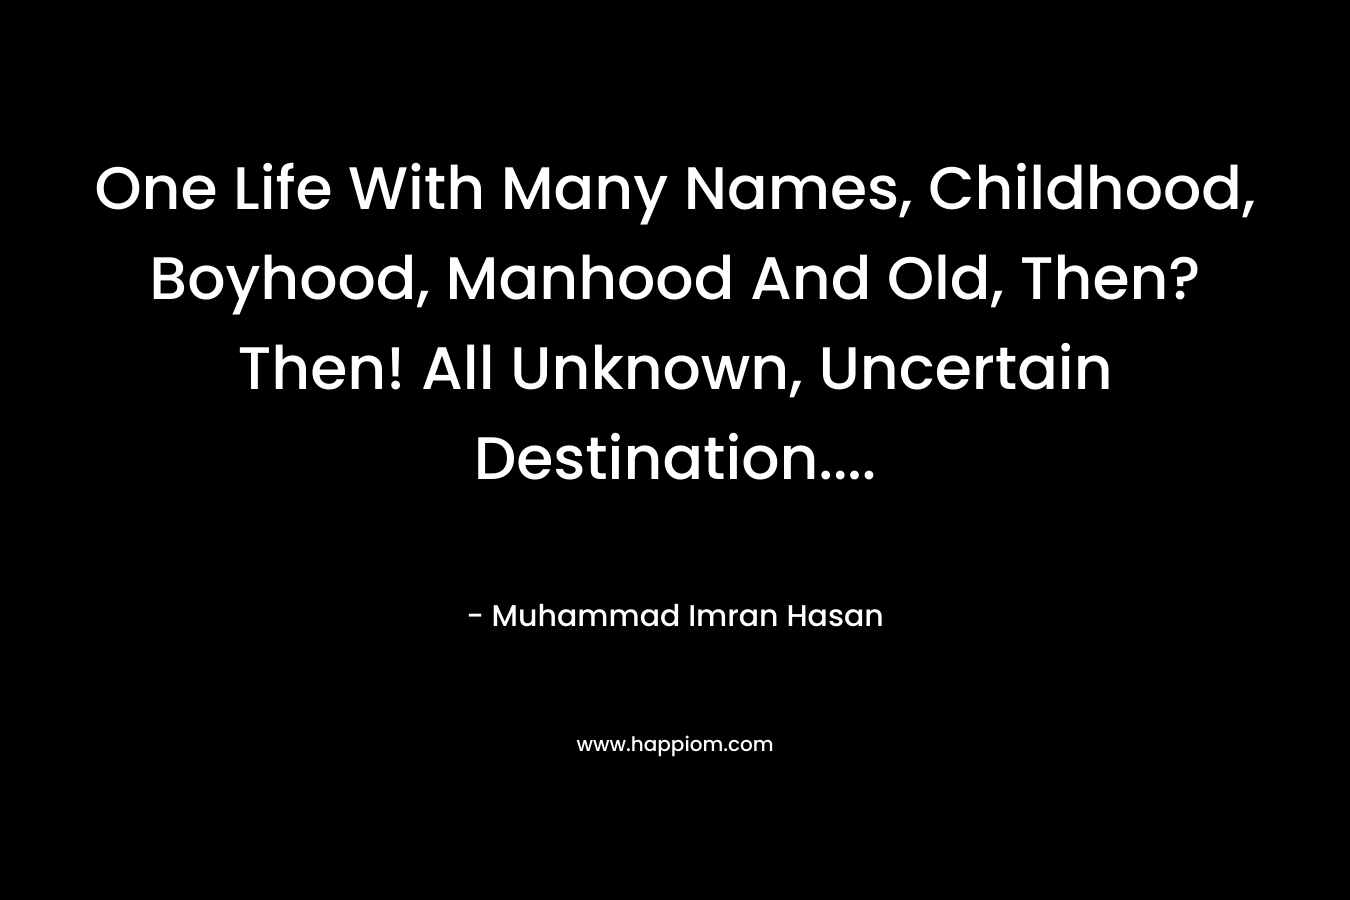 One Life With Many Names, Childhood, Boyhood, Manhood And Old, Then? Then! All Unknown, Uncertain Destination…. – Muhammad Imran Hasan